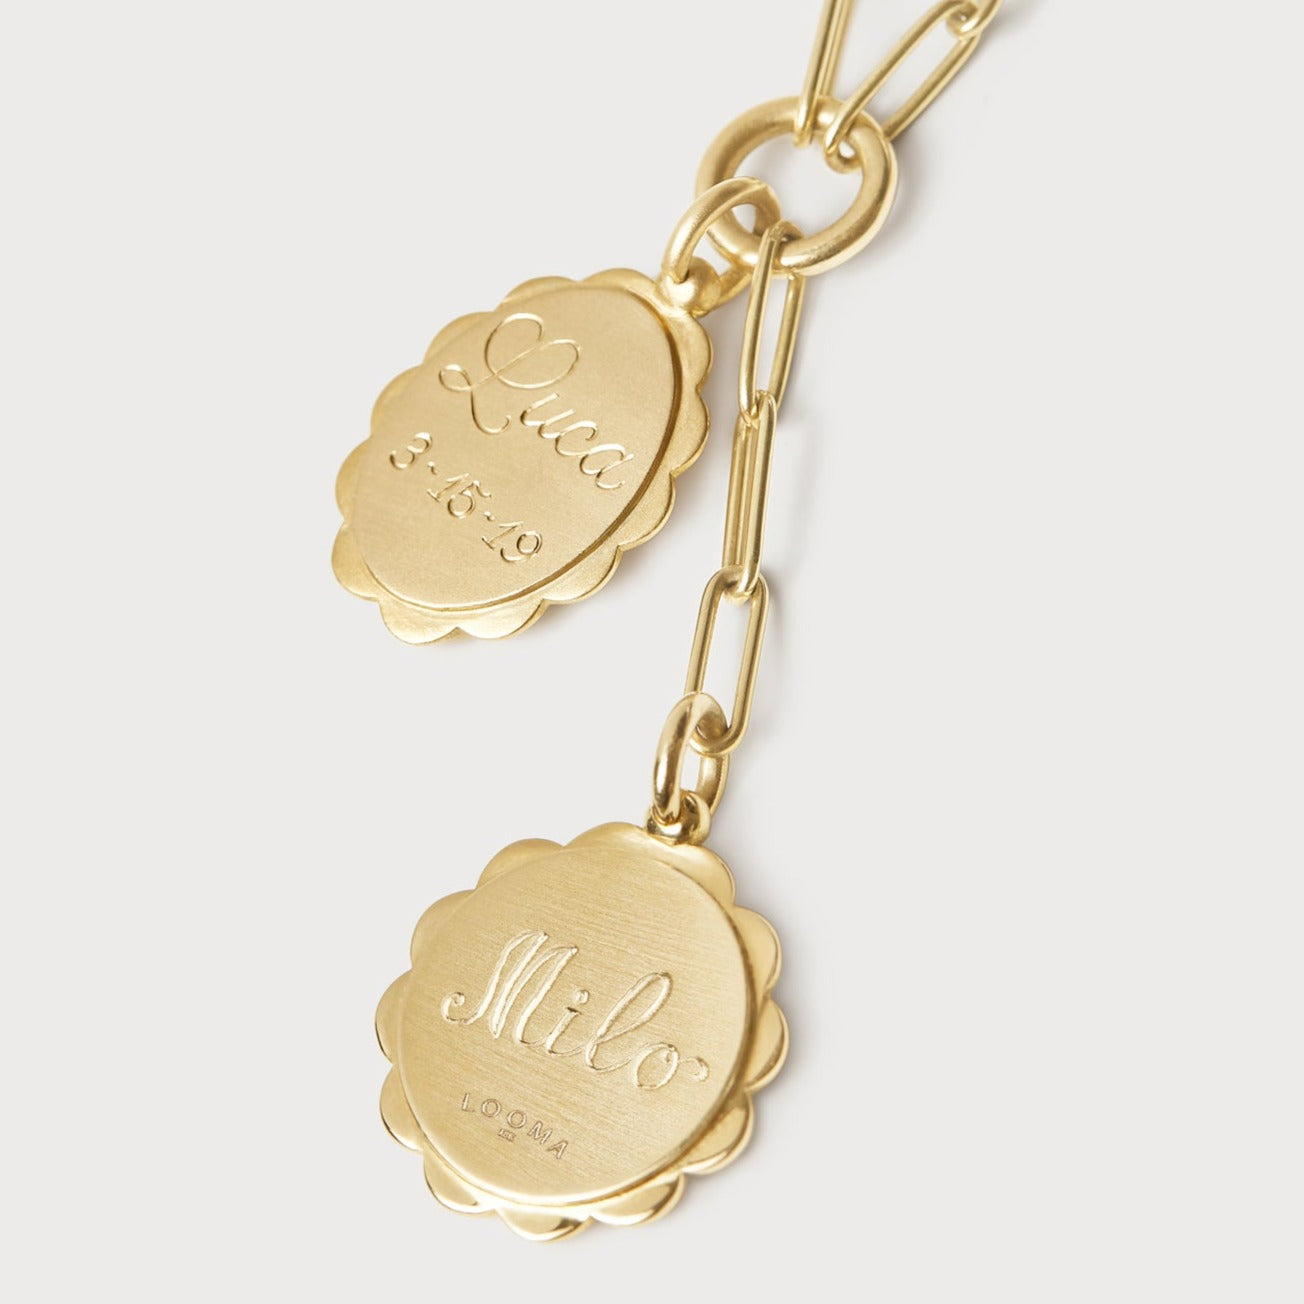 Personalized Scalloped Silhouette on Extension Chain Pendant Looma   